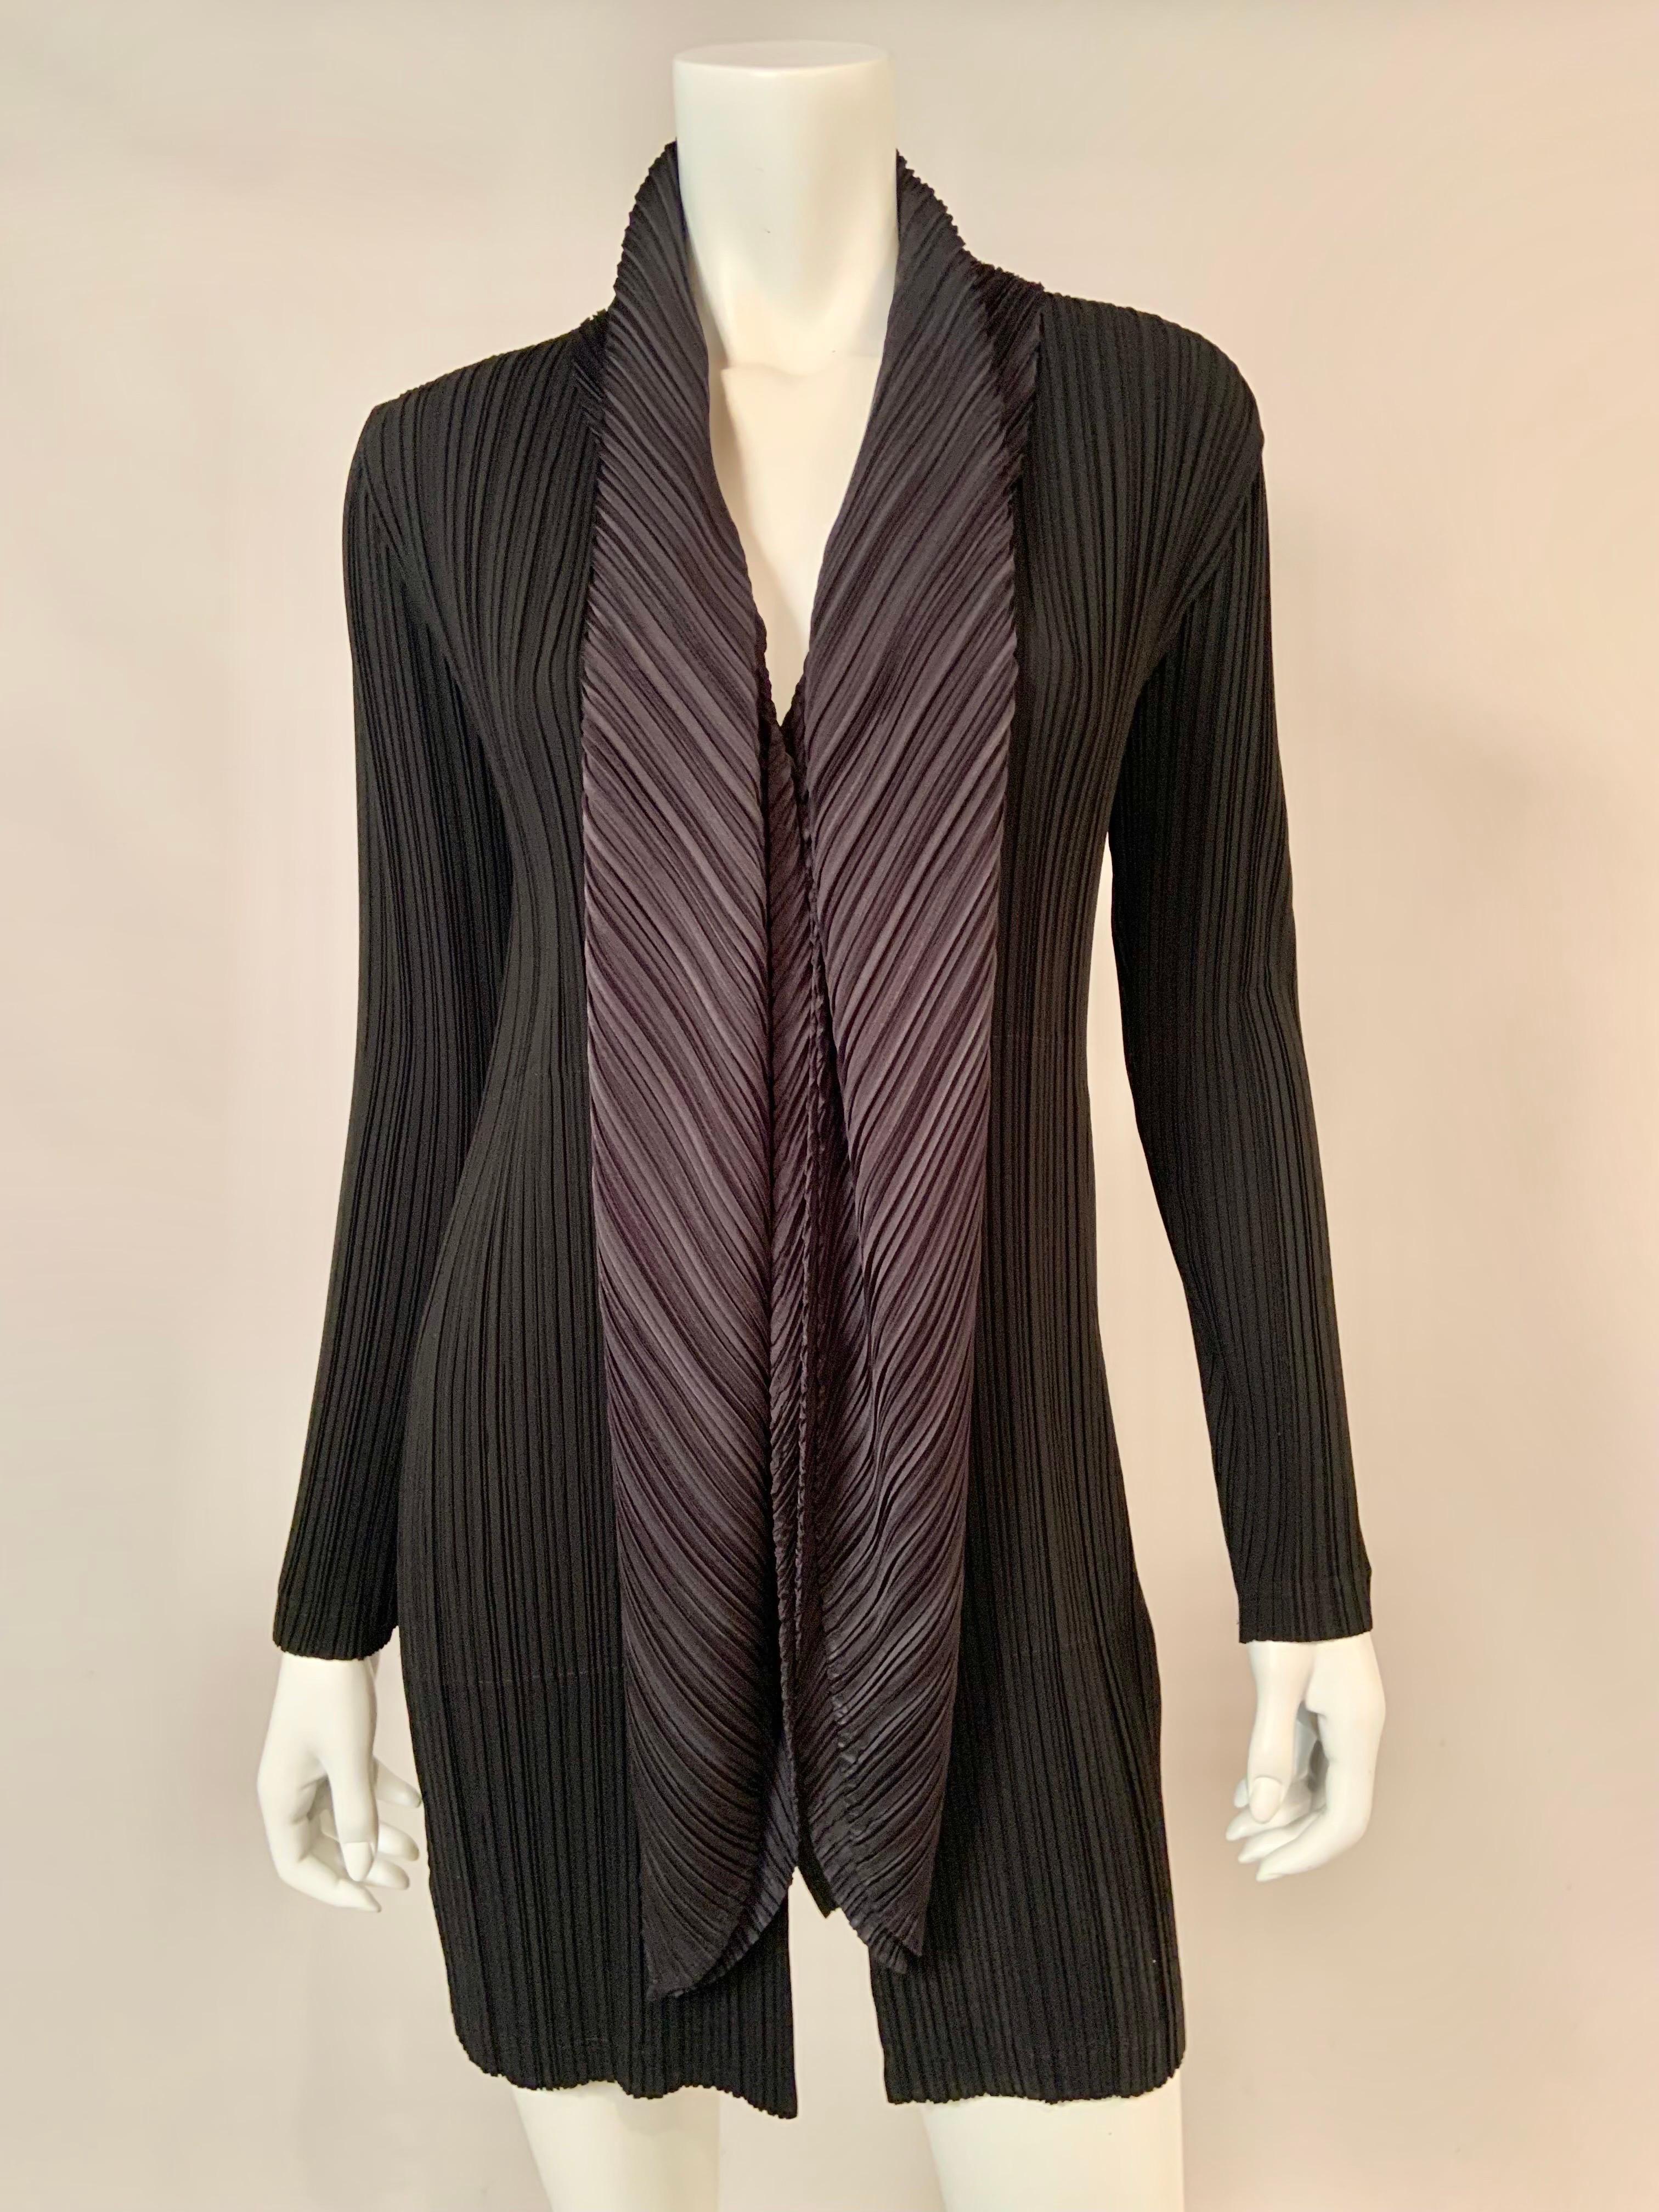 A fabulous black pleated coat from Issey Miyake has a three button closure and an attached scarf which can be worn in many ways.  This is effortlessly chic dressing at it's best.  Marked a size 2 or Medium, it is in excellent